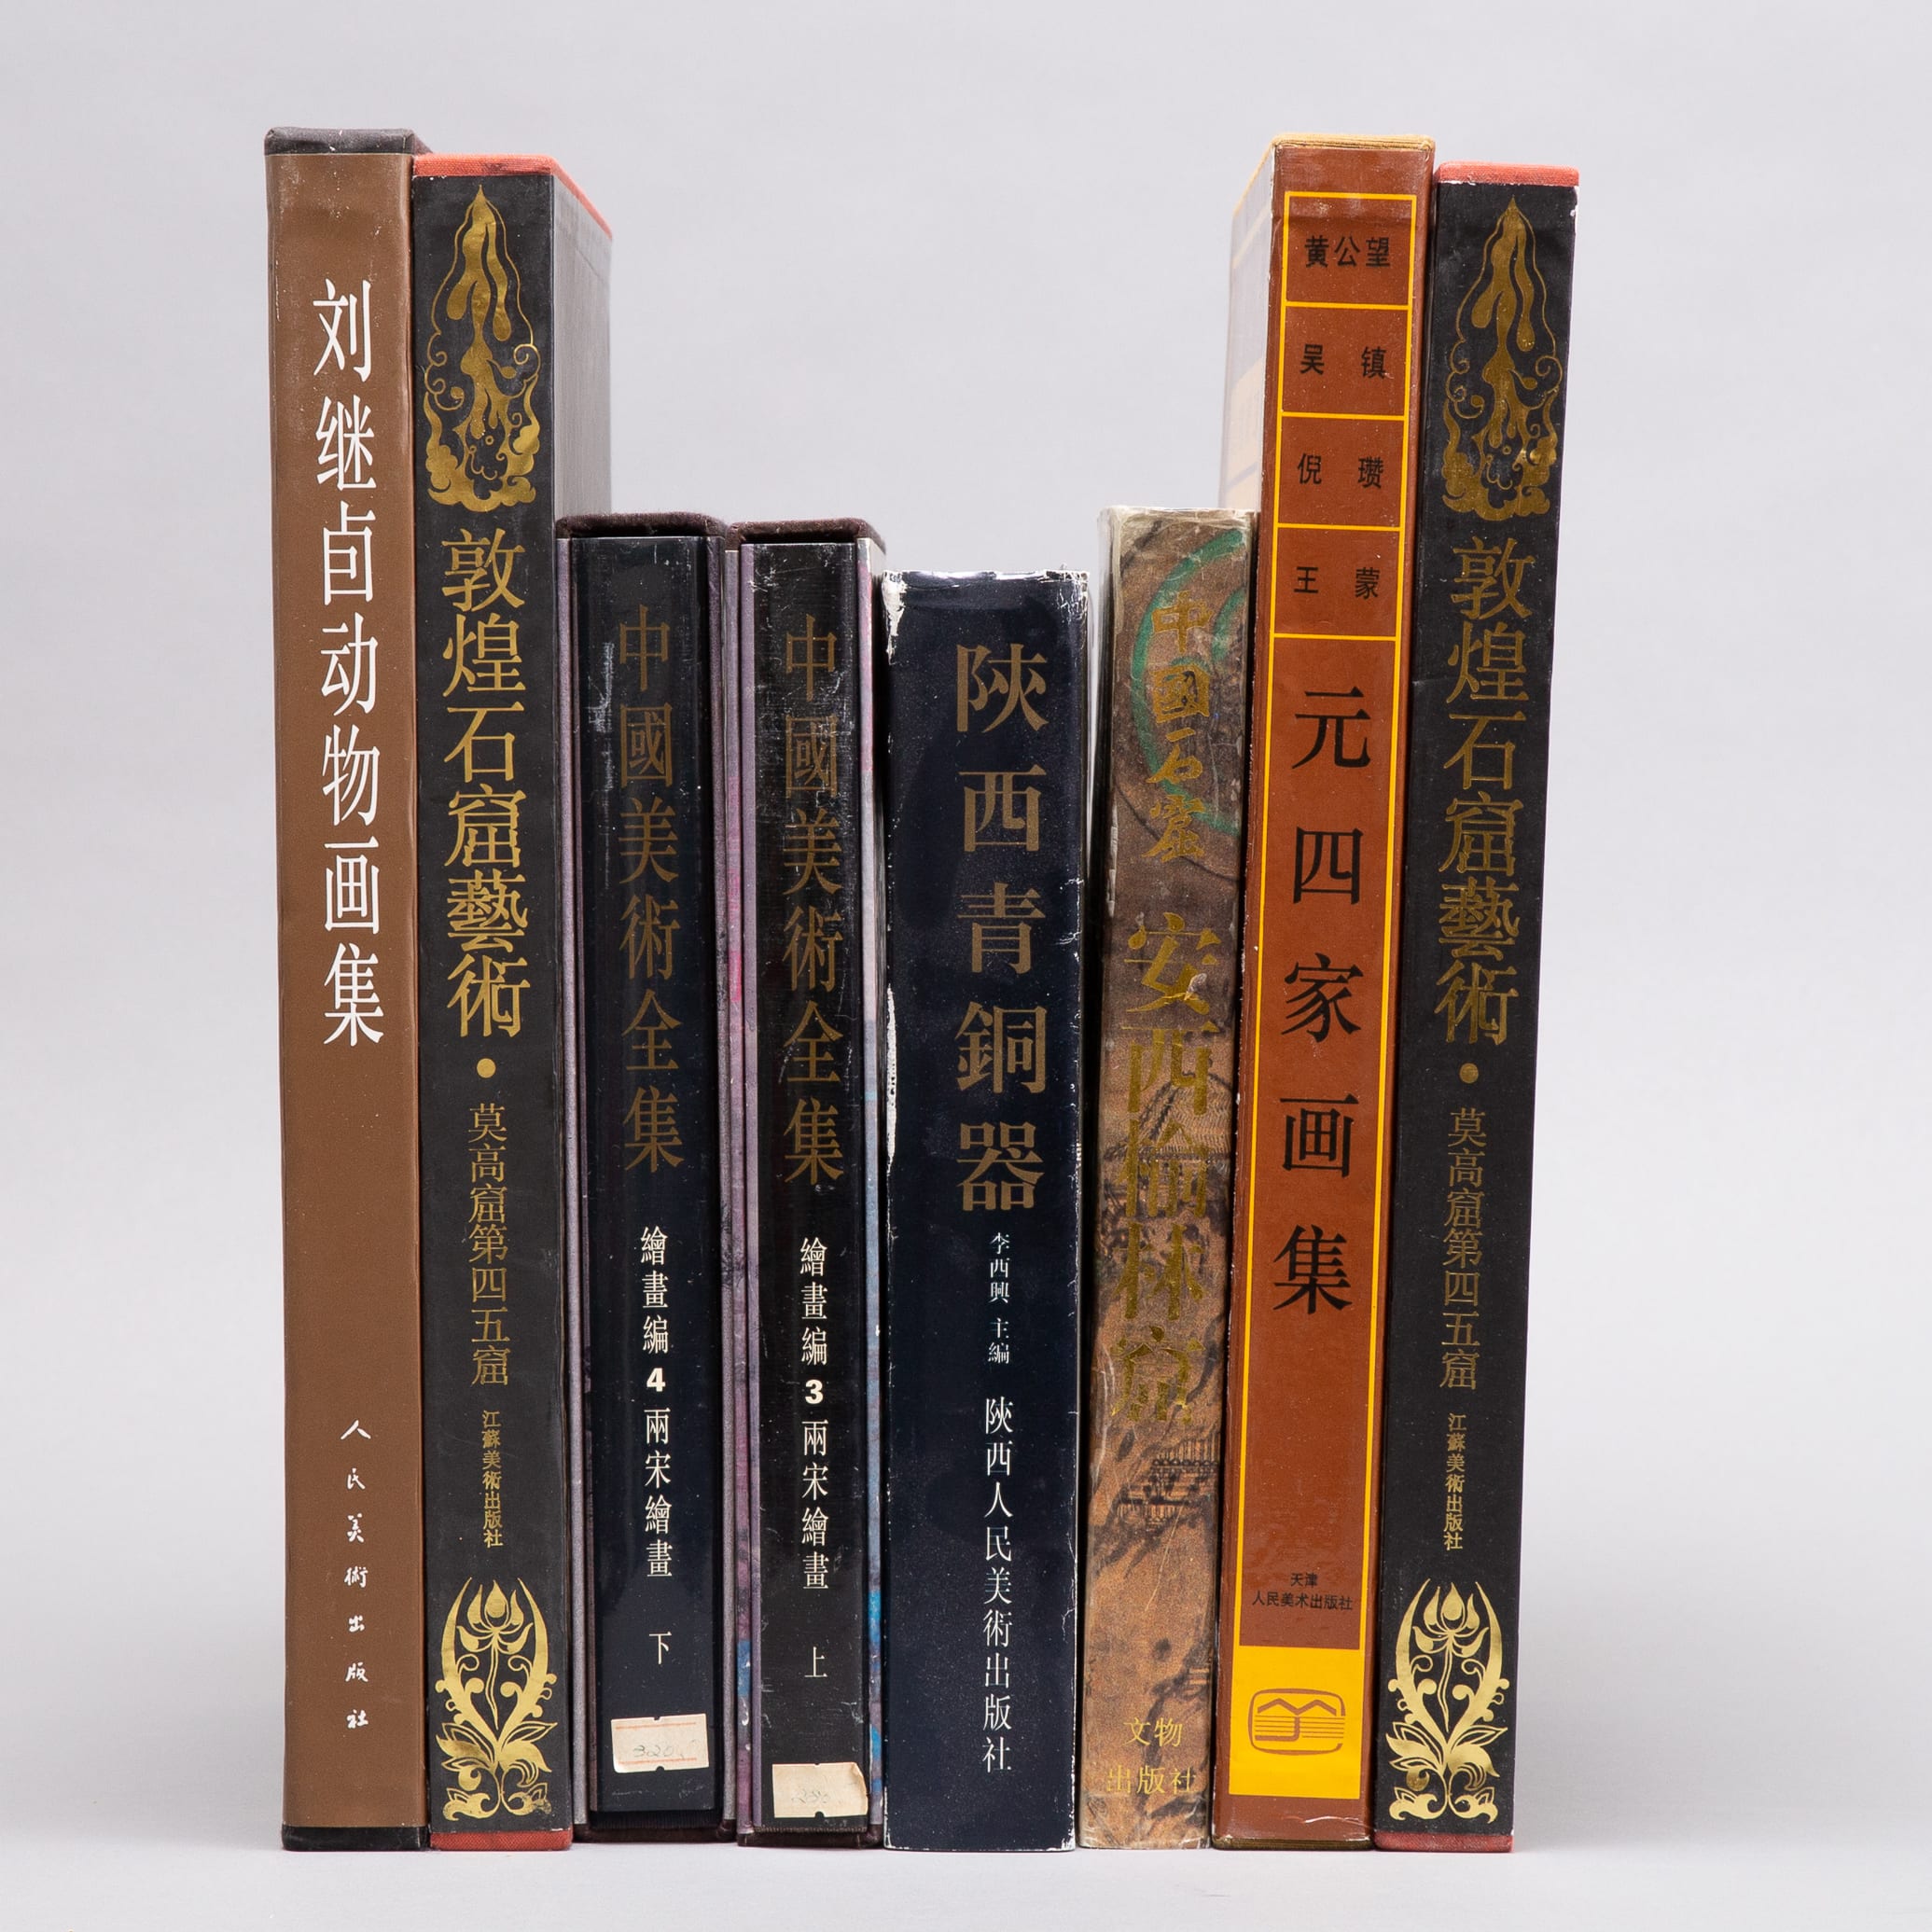 Lot 297: 9 Books on Chinese Painting written in Chinese